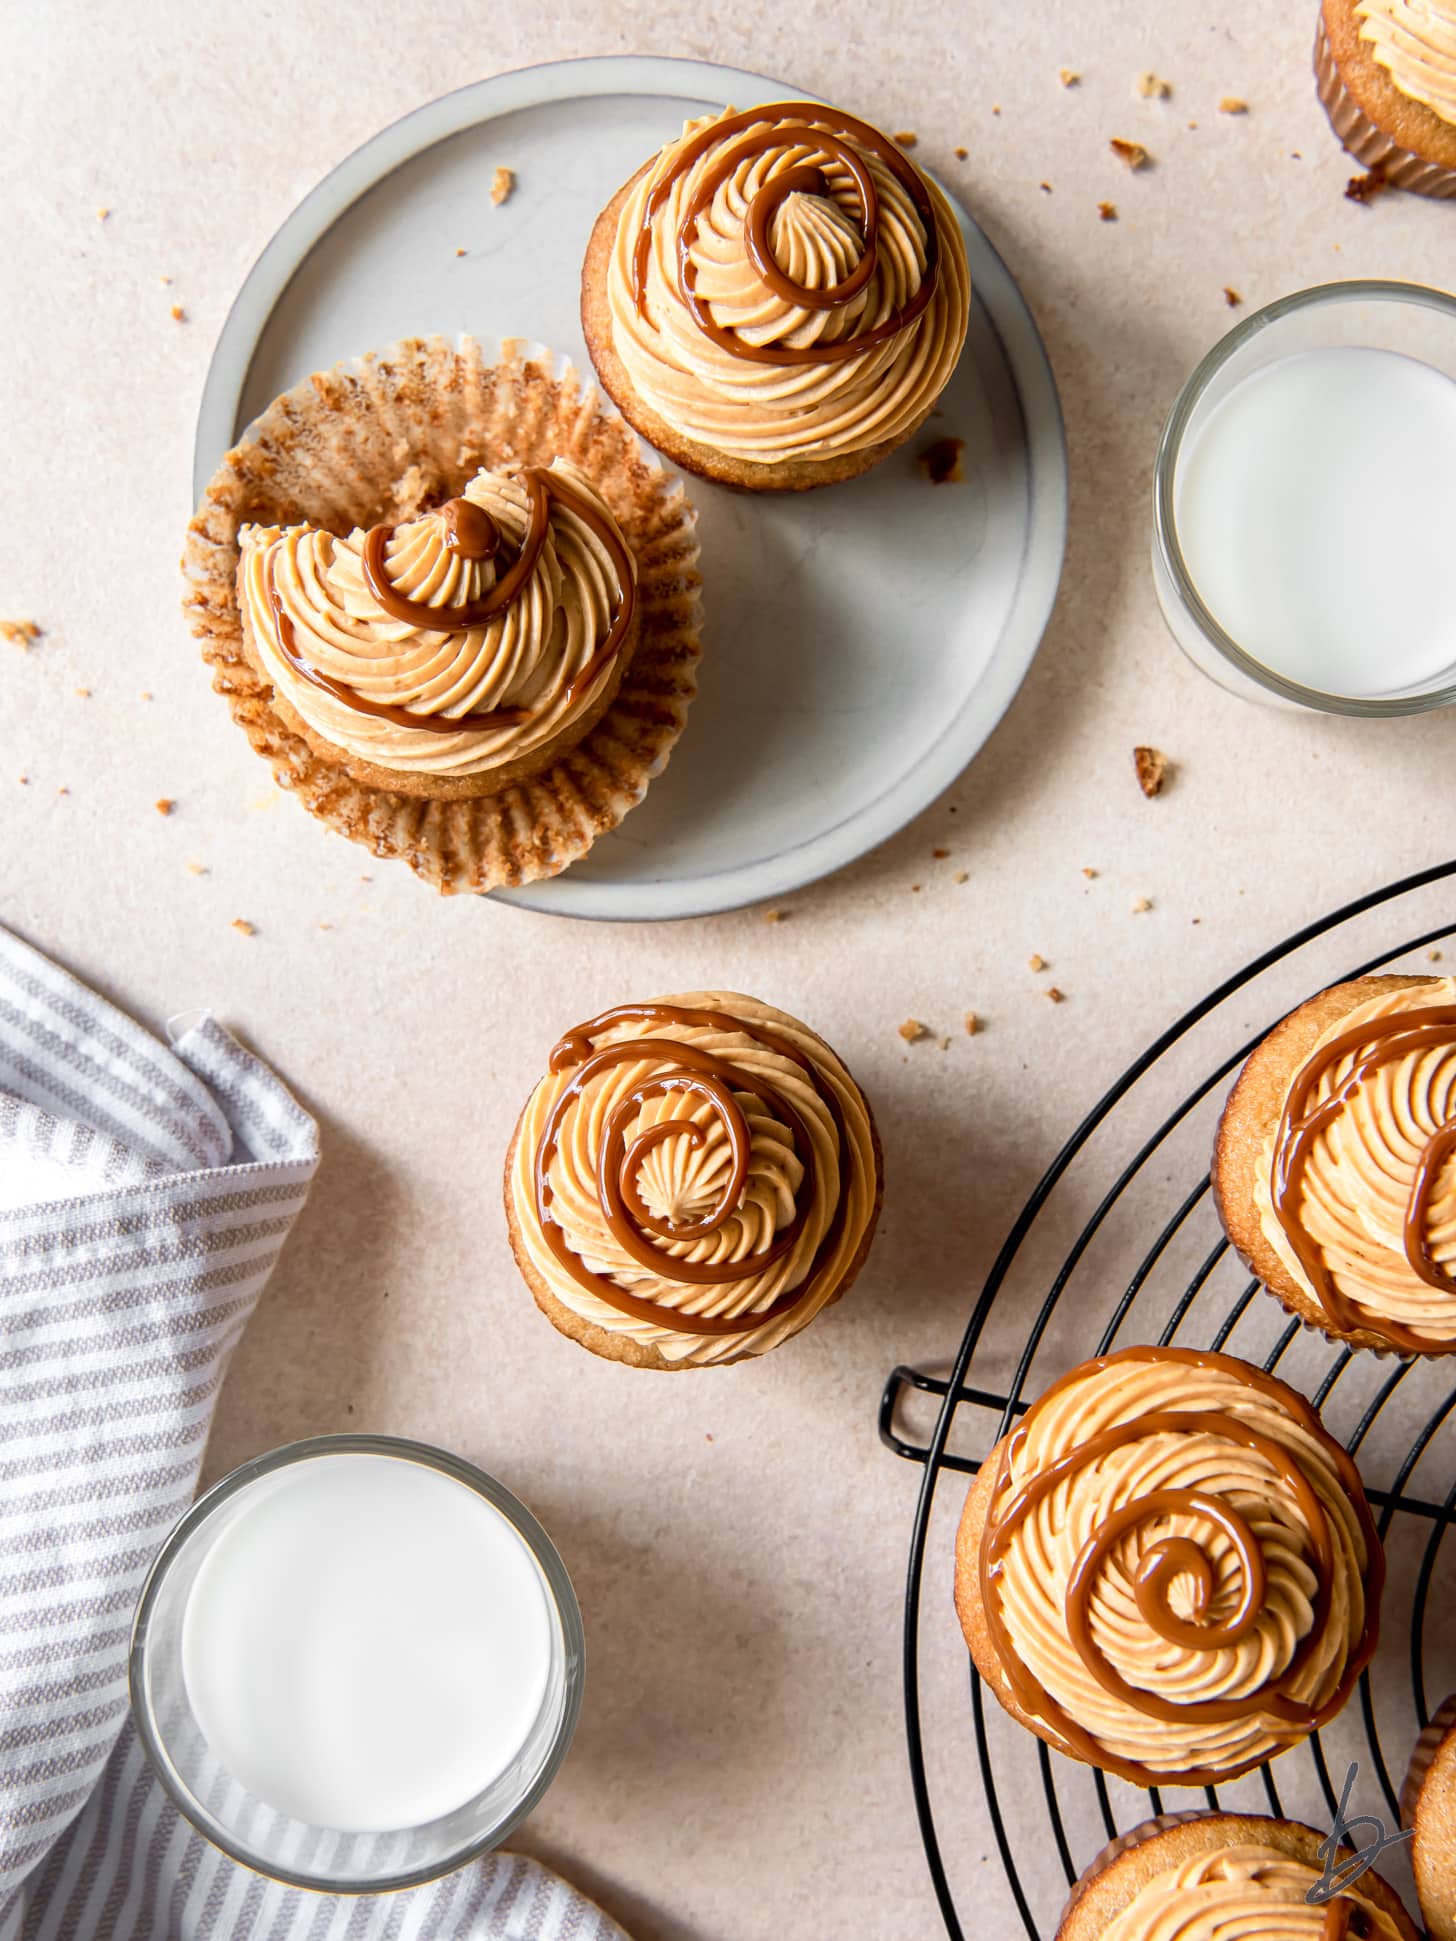 tops of dulce de leche cupcakes with frosting and swirl next to a glass of milk.